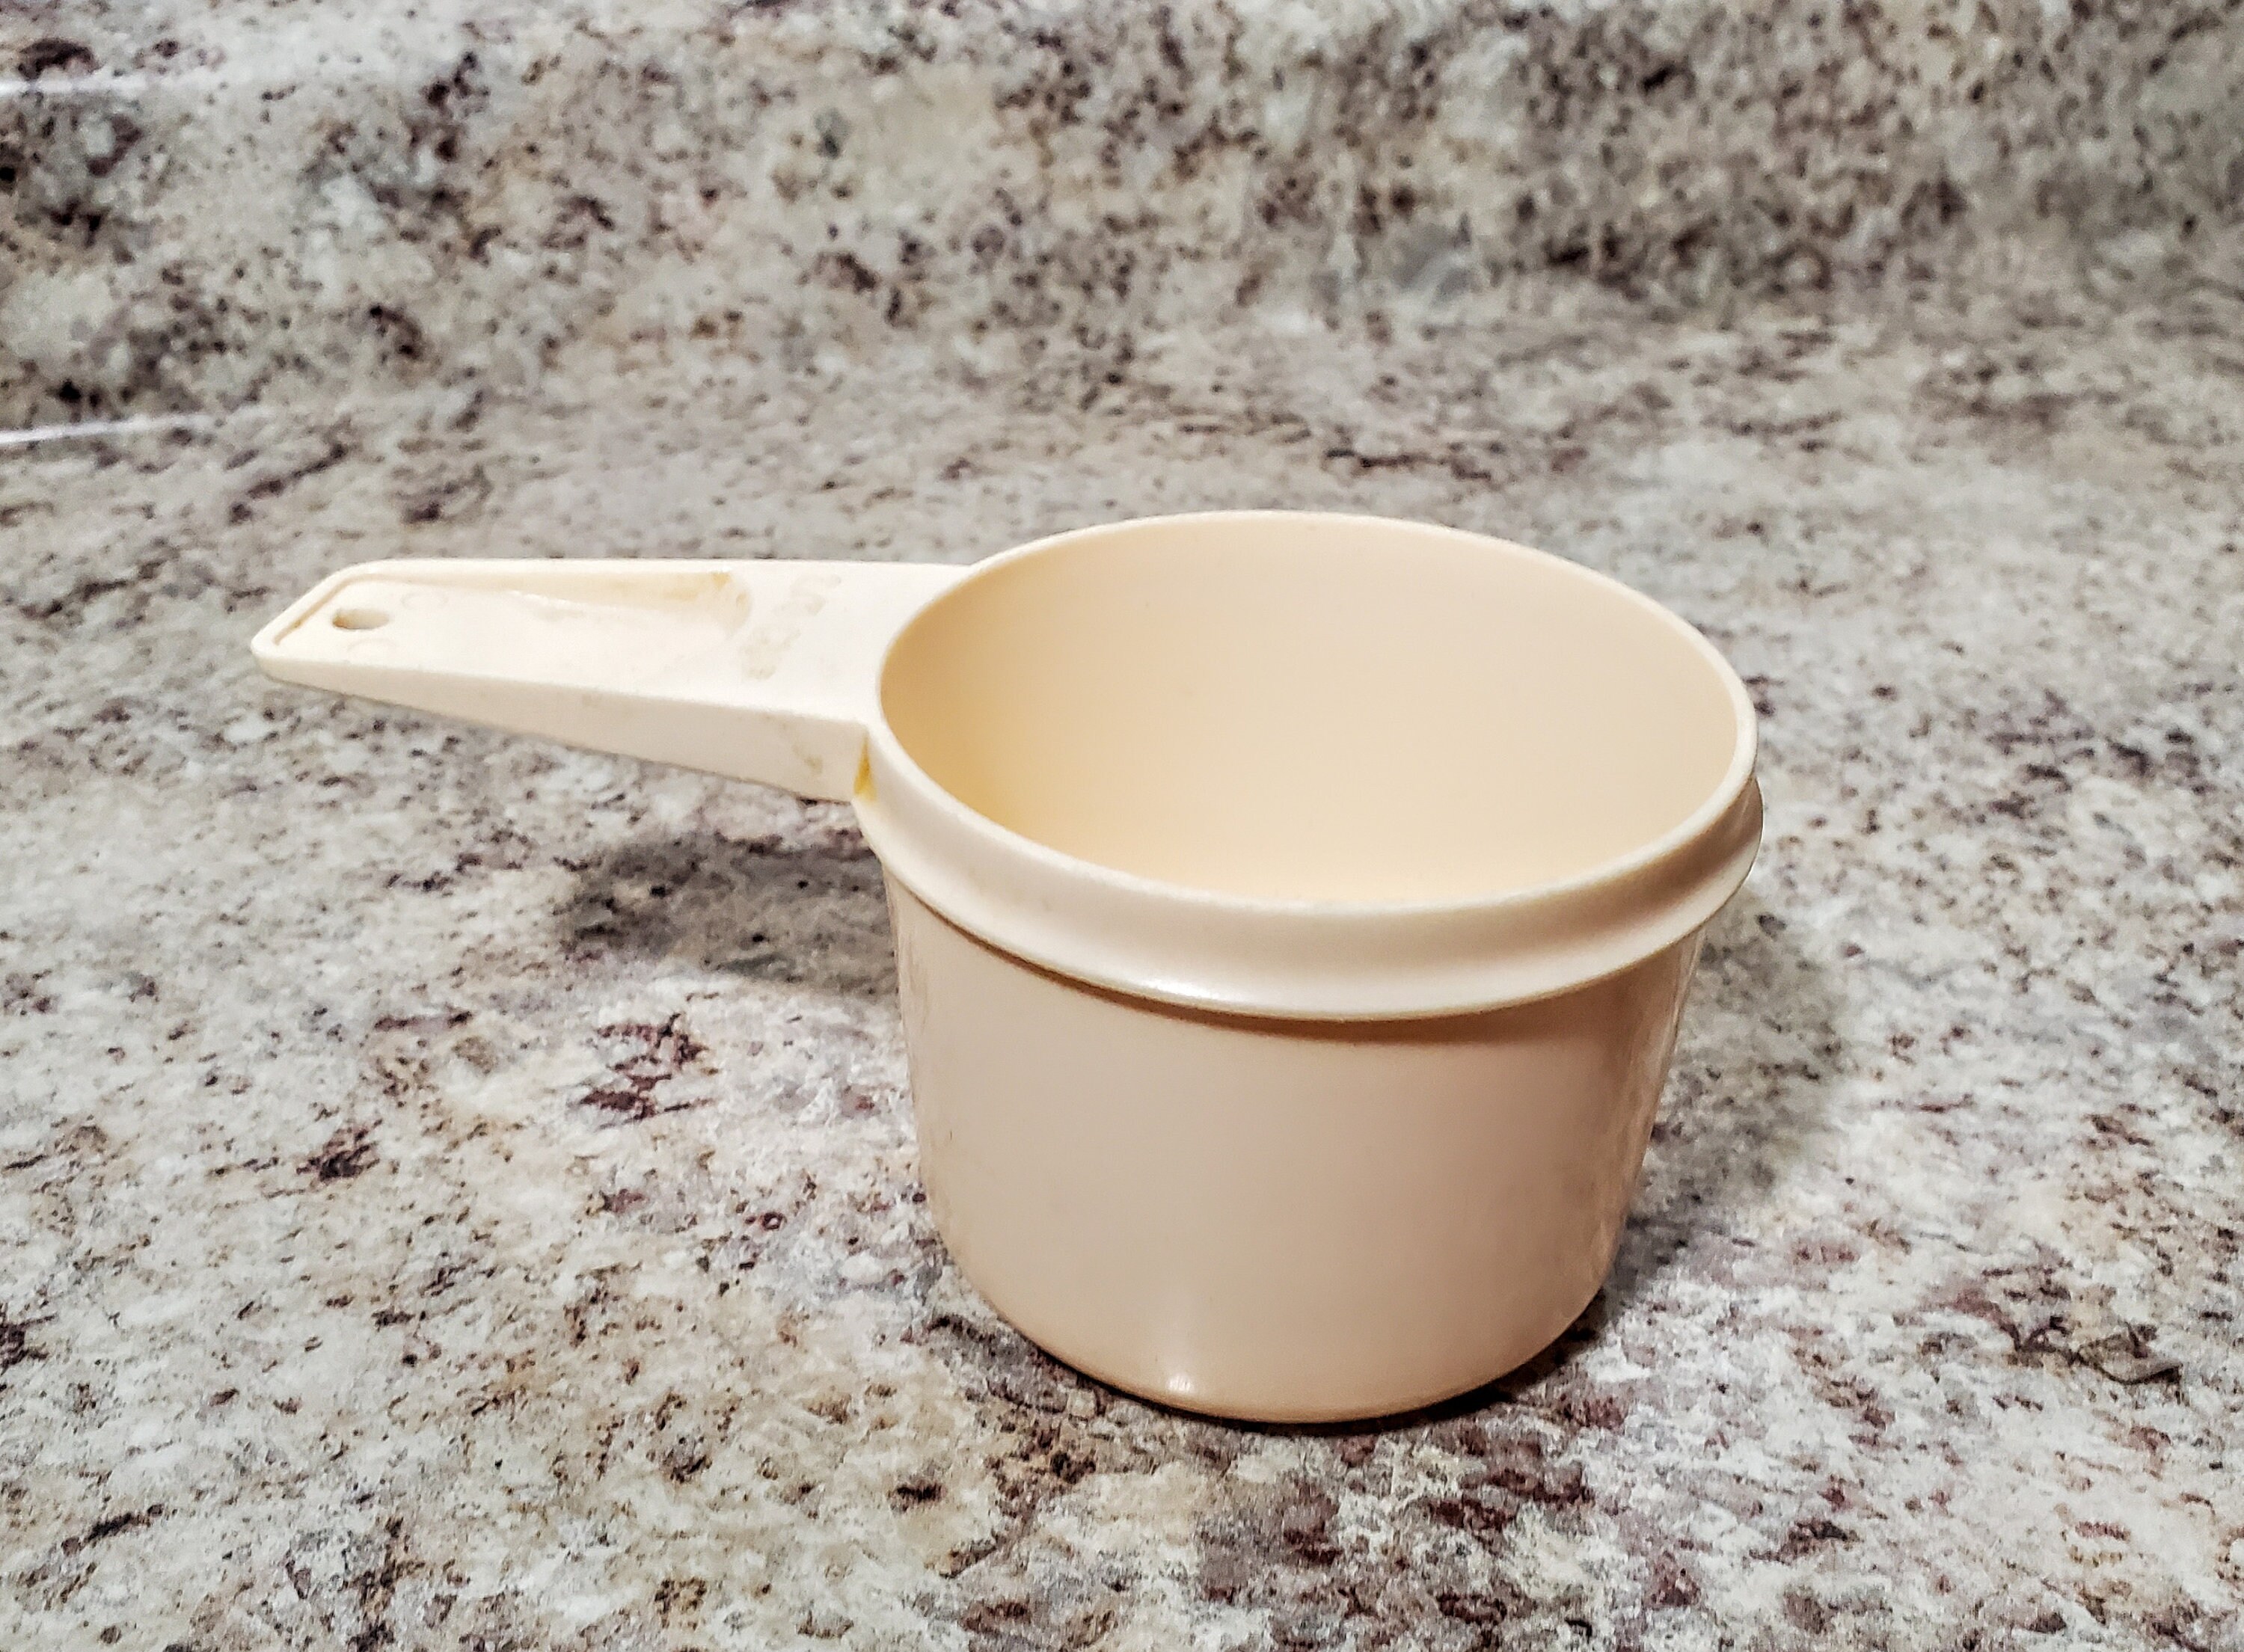 Betty Crocker 4 Cup Plastic Measuring Cup 1 Quart Measuring Cup Metric  Milliliters and Ounces. Collectible Vintage Kitchen 